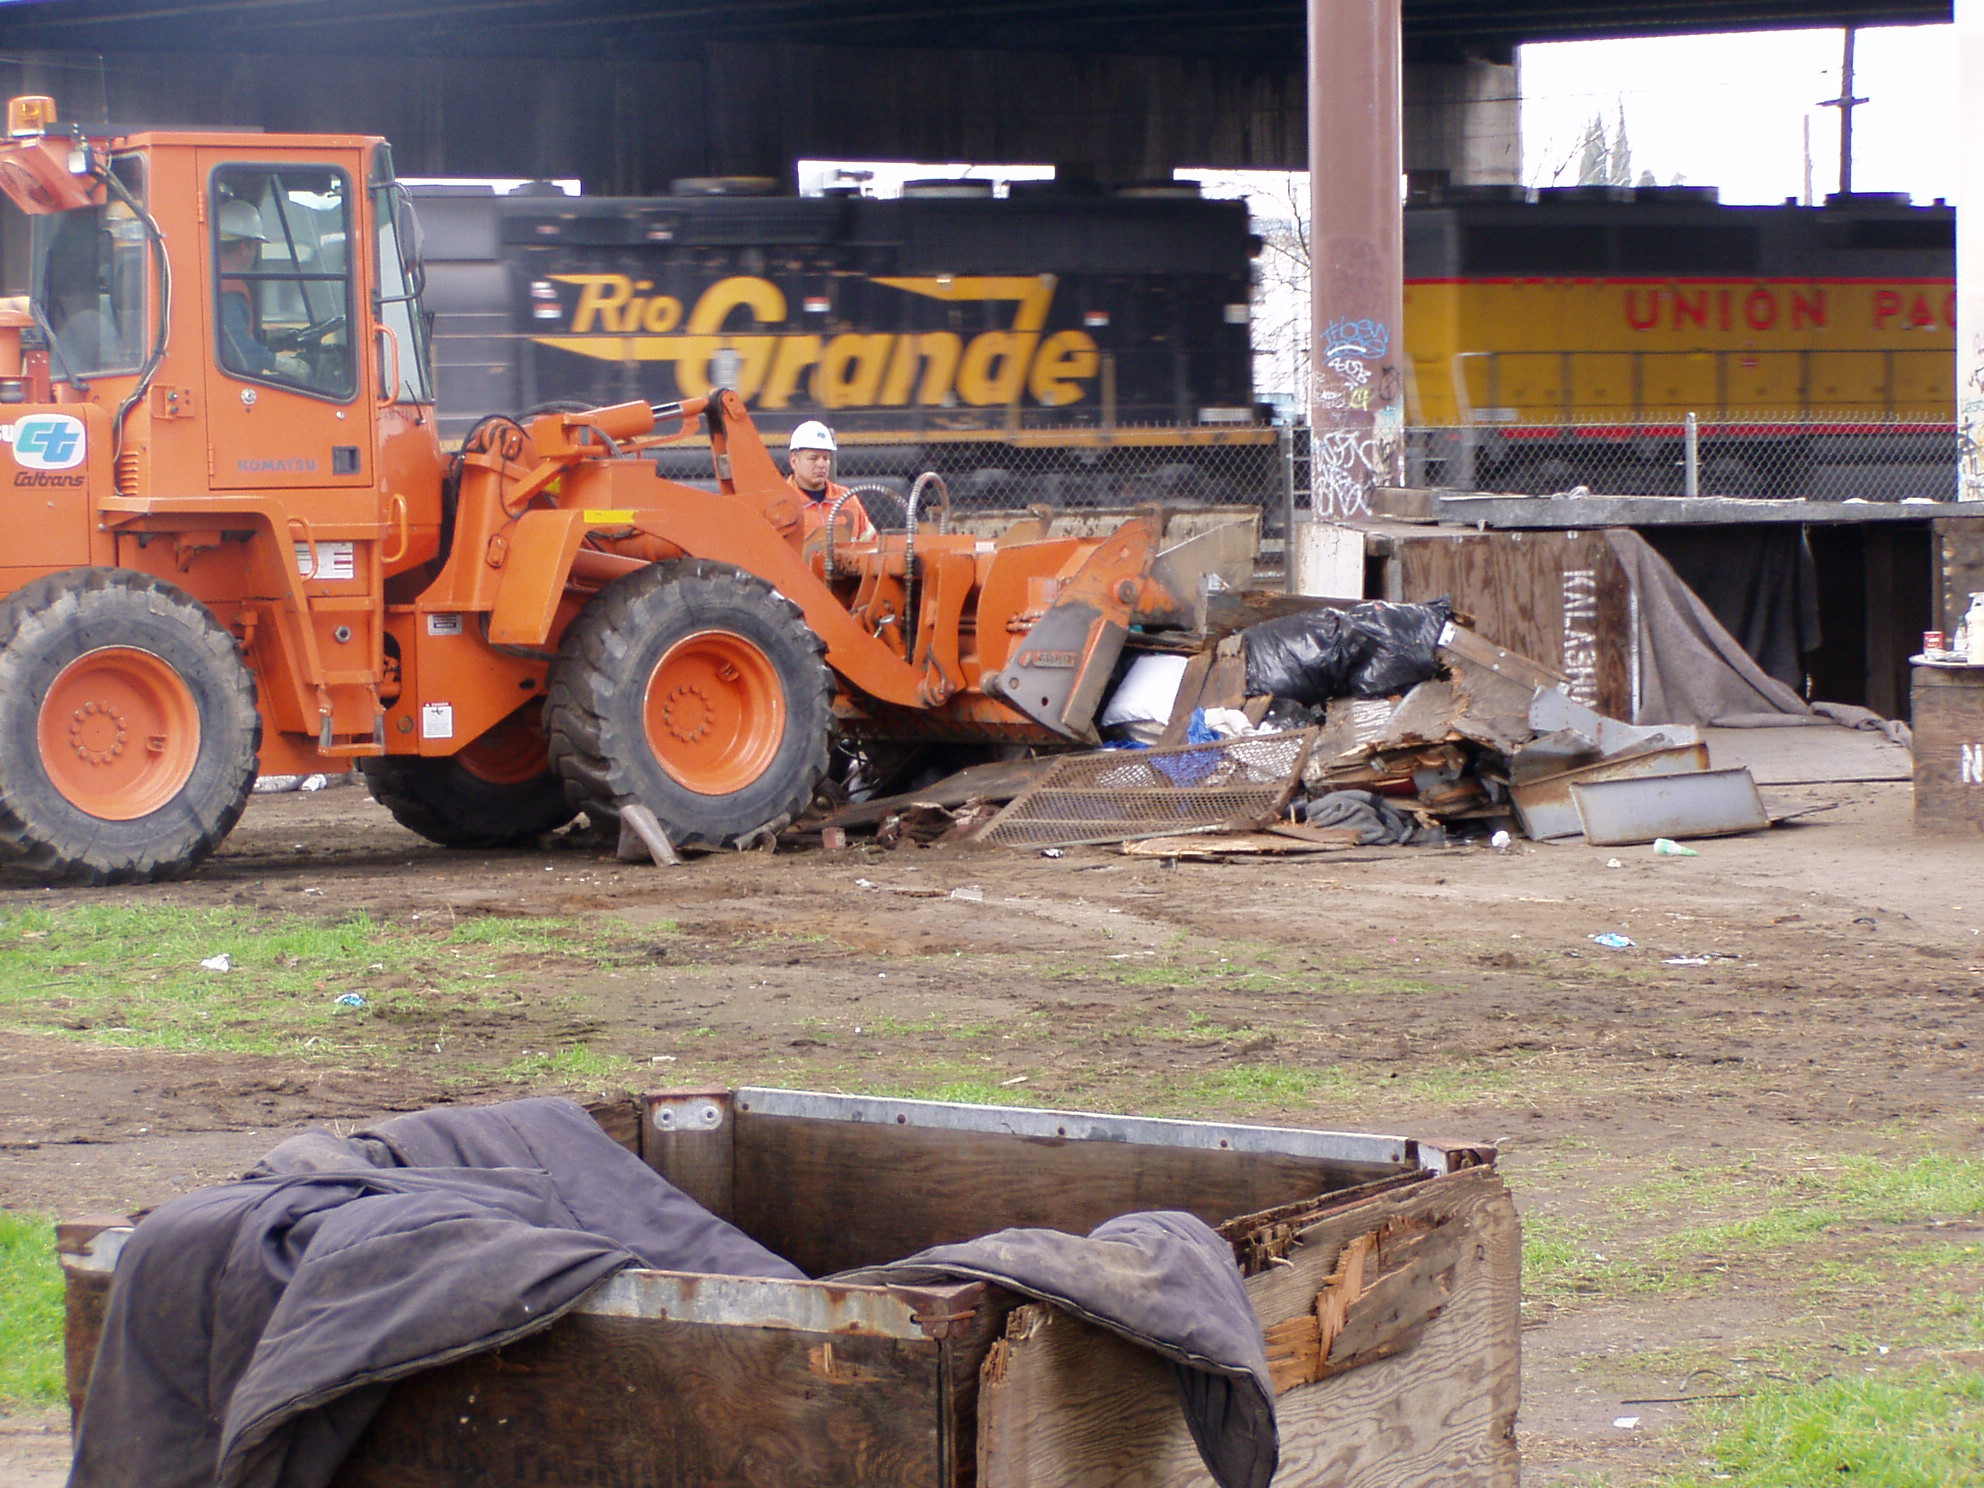 Both Caltrans and the City of Fresno used bulldozers to take and immediately destroy homeless people’s property.